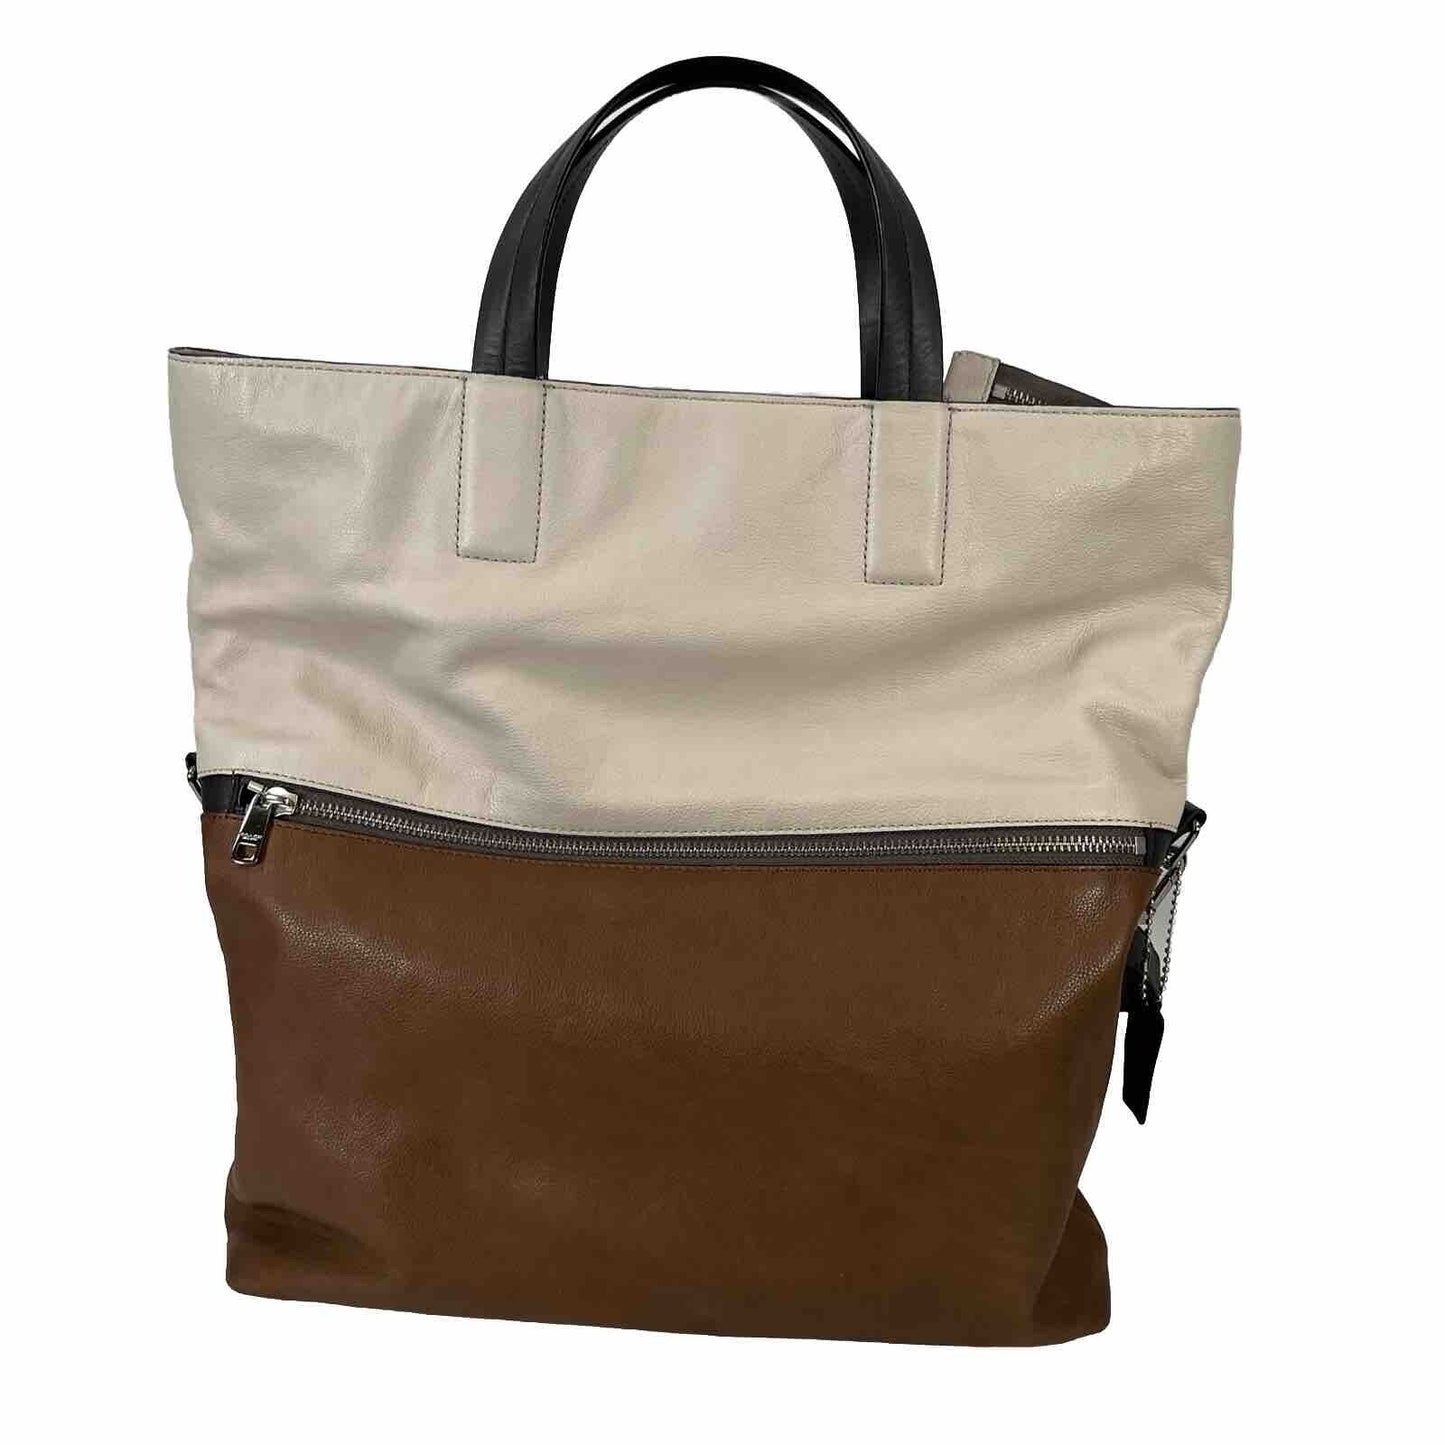 Coach Men's Ivory/Brown Leather Thompson Colorblock Foldover Bag